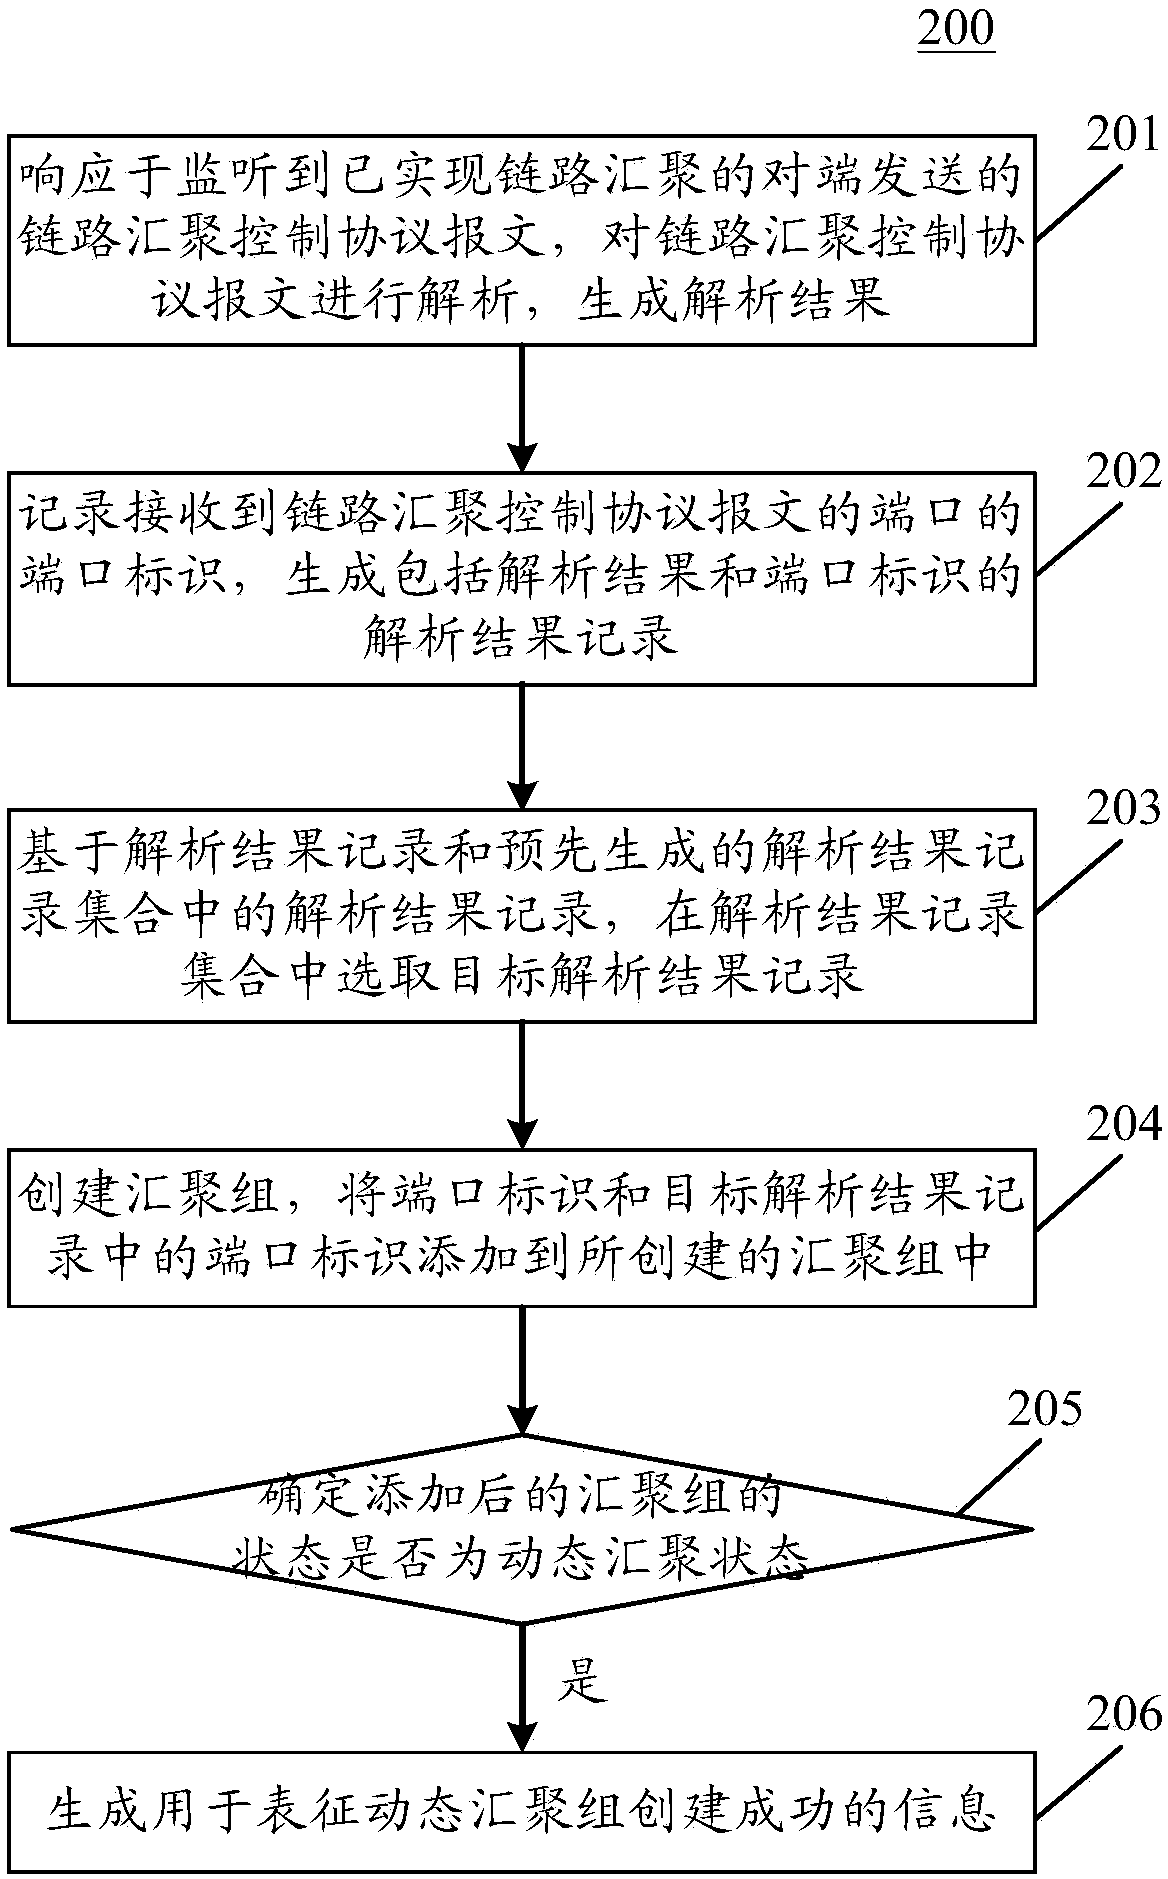 Method and apparatus for aggregating links